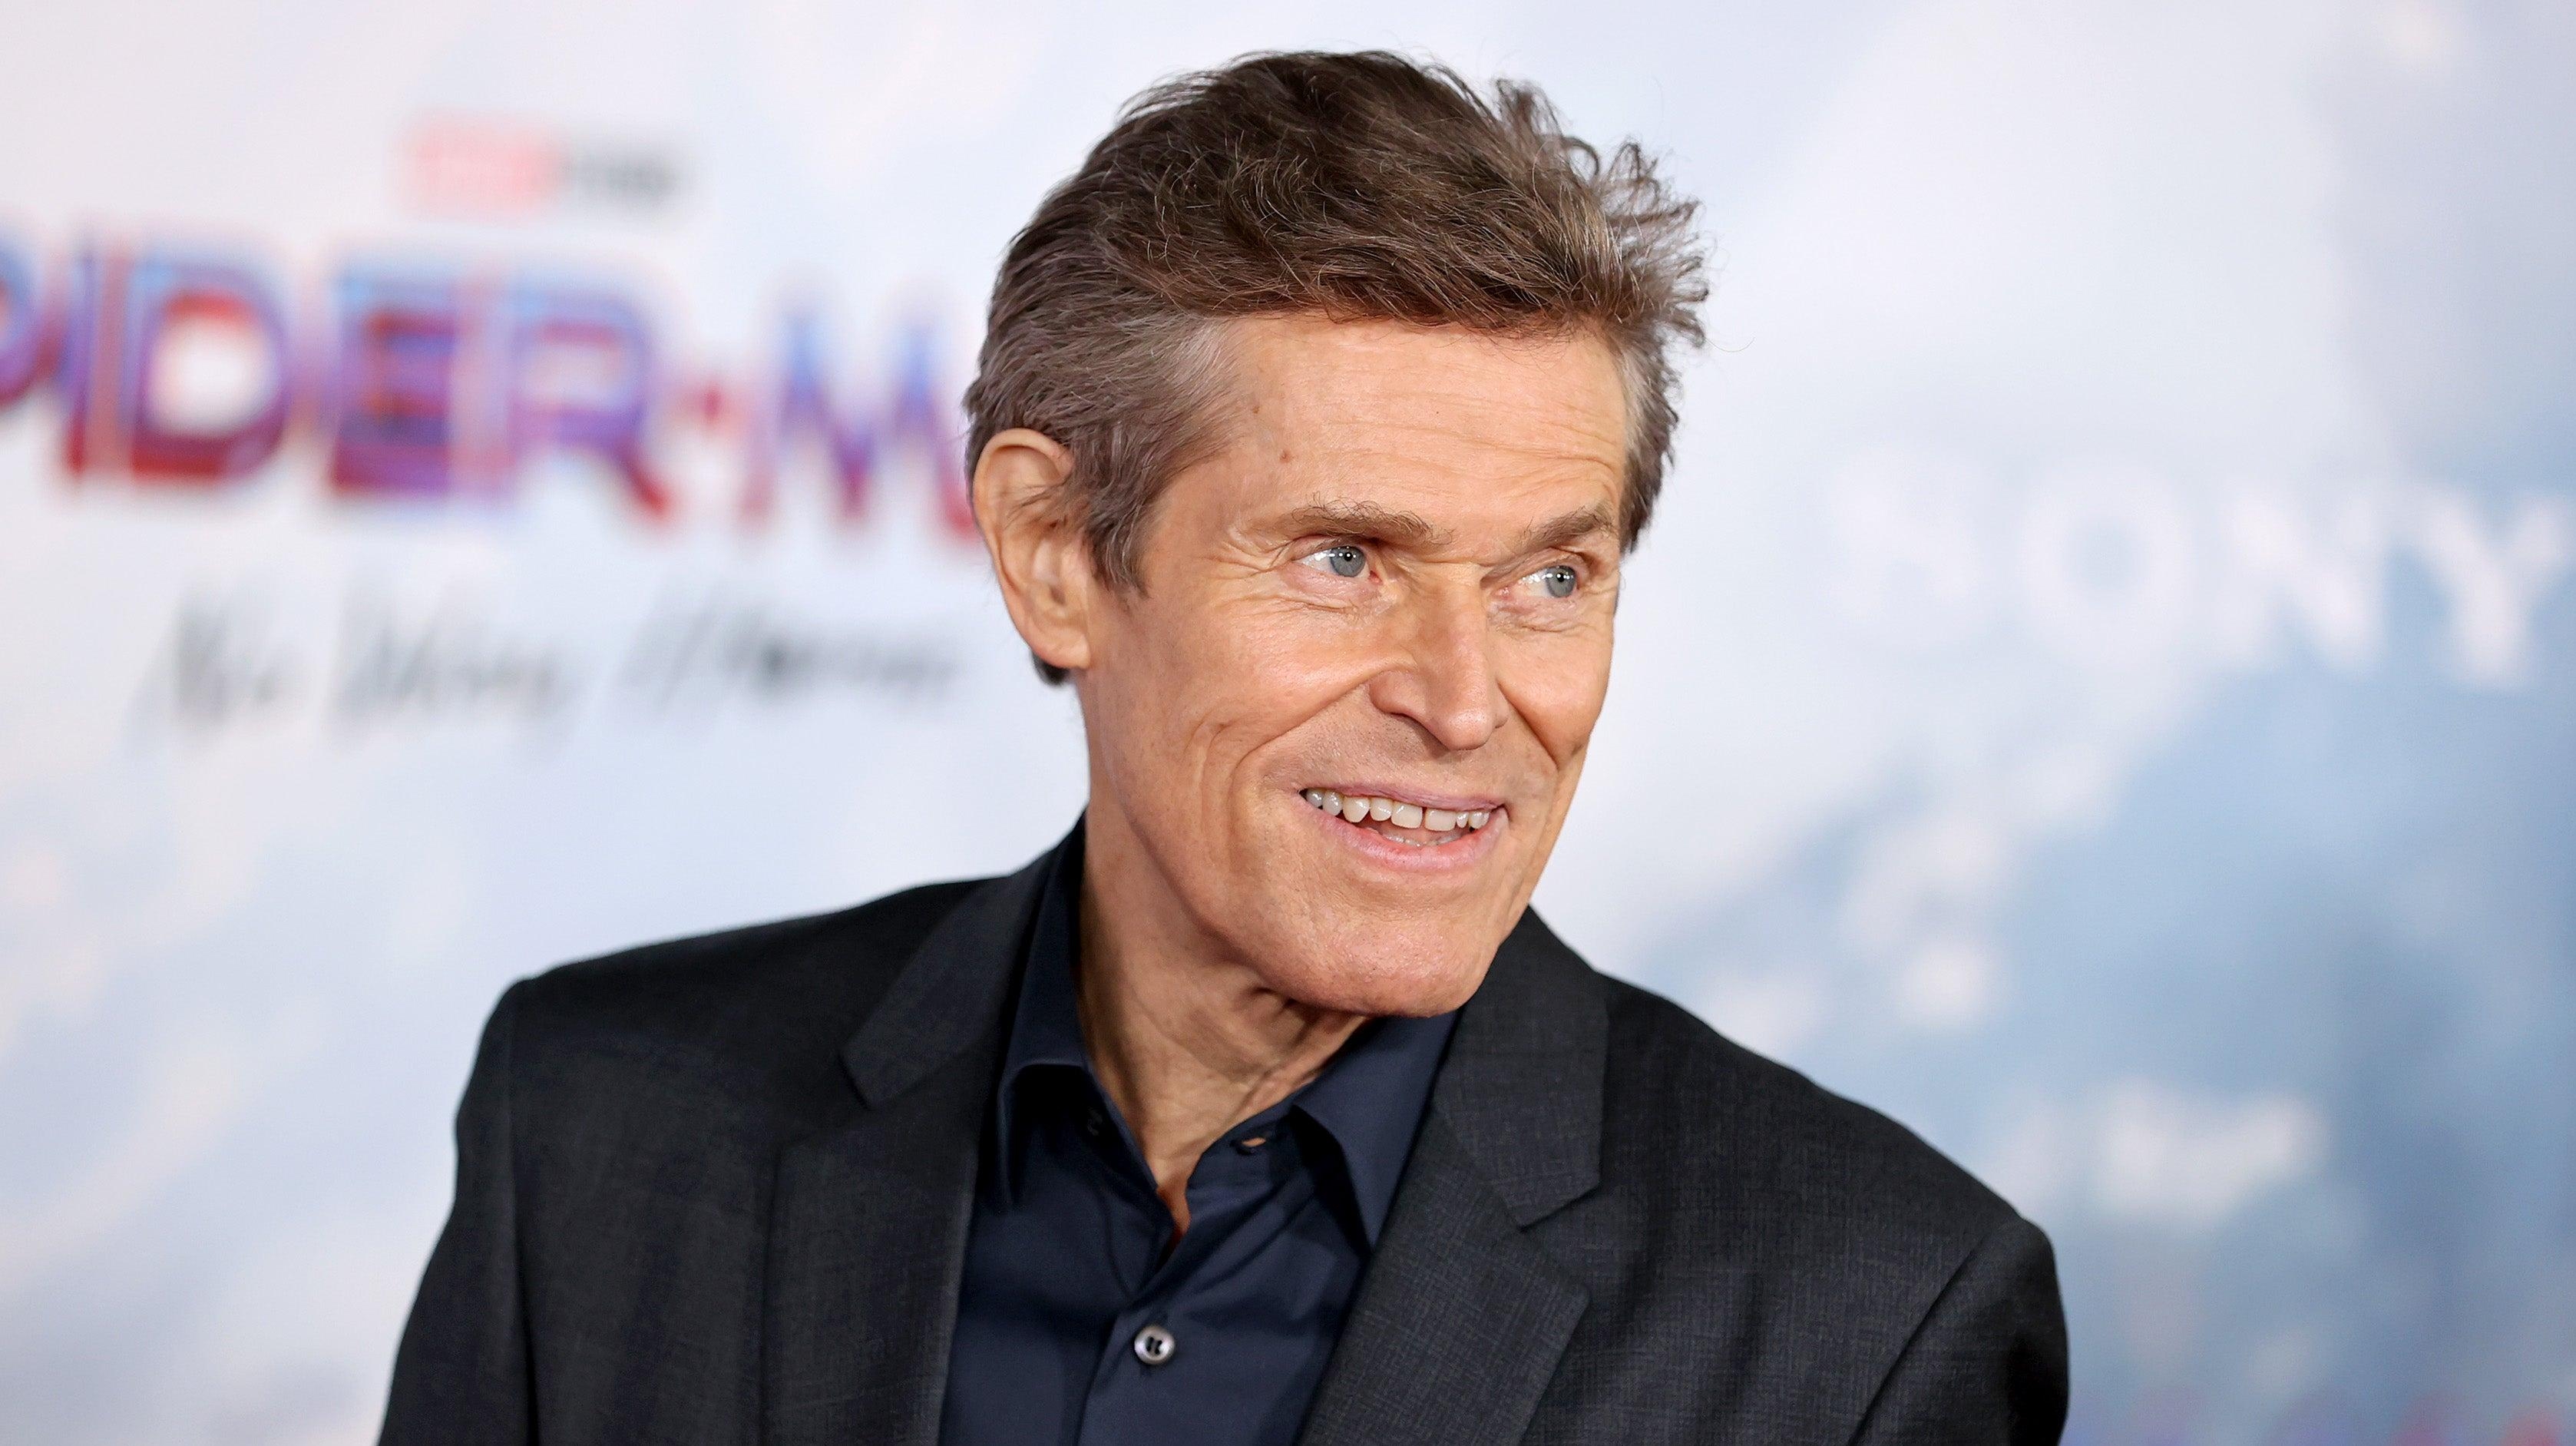 Willem Dafoe wasn’t going to join Spider-Man: No Way Home for just a cameo appearance